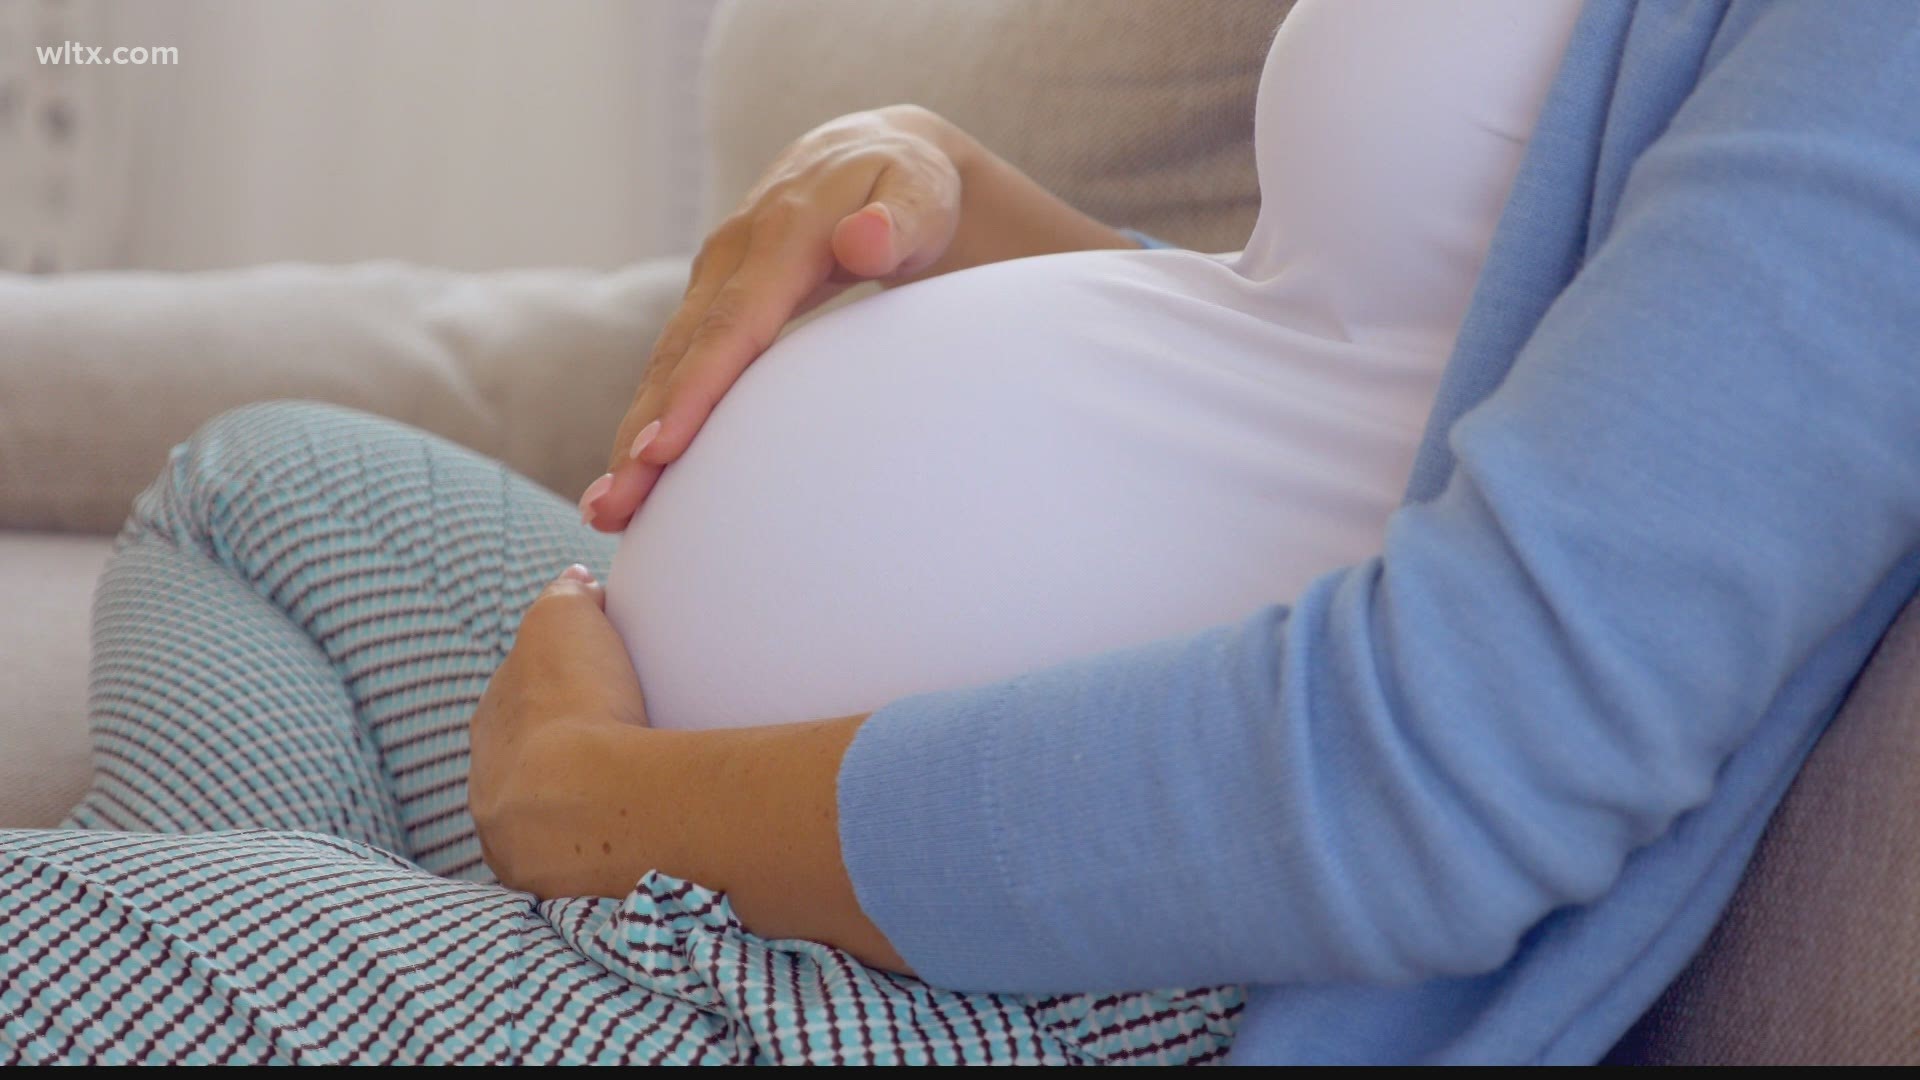 Women in the United States have a higher risk of dying during pregnancy and right after pregnancy than women in any other industrialized nation.